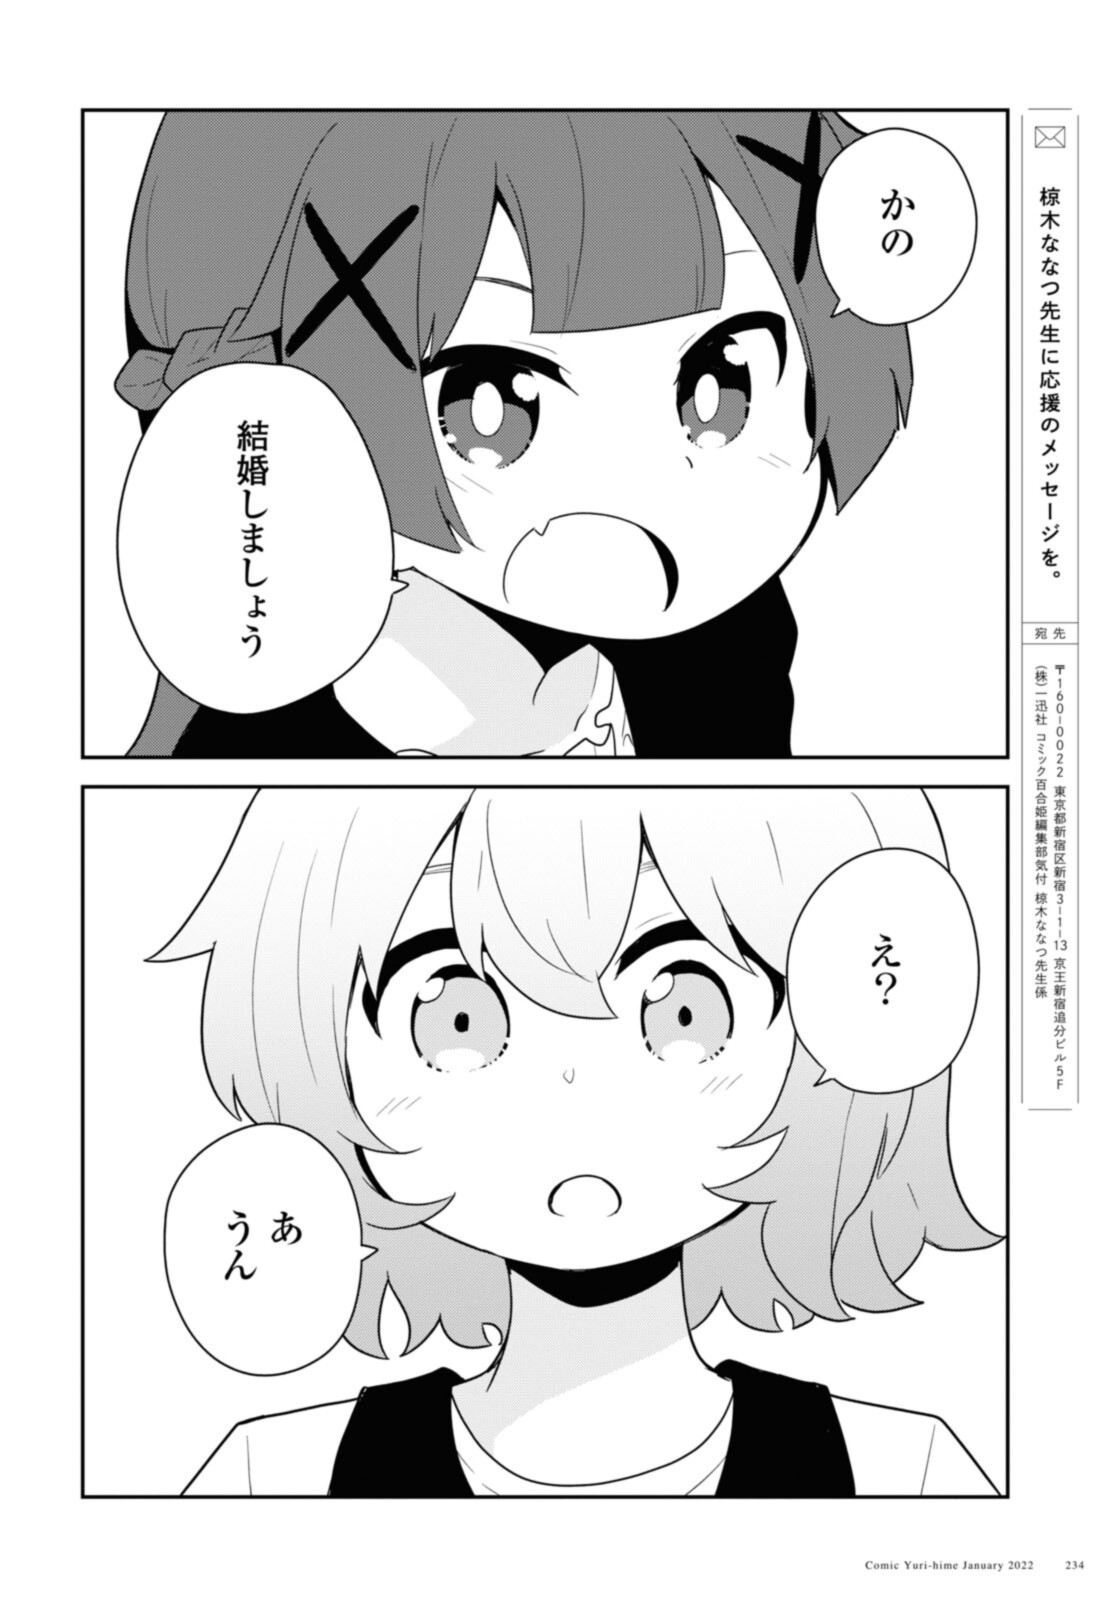 Wataten! An Angel Flew Down to Me 私に天使が舞い降りた！ 第91話 - Page 14